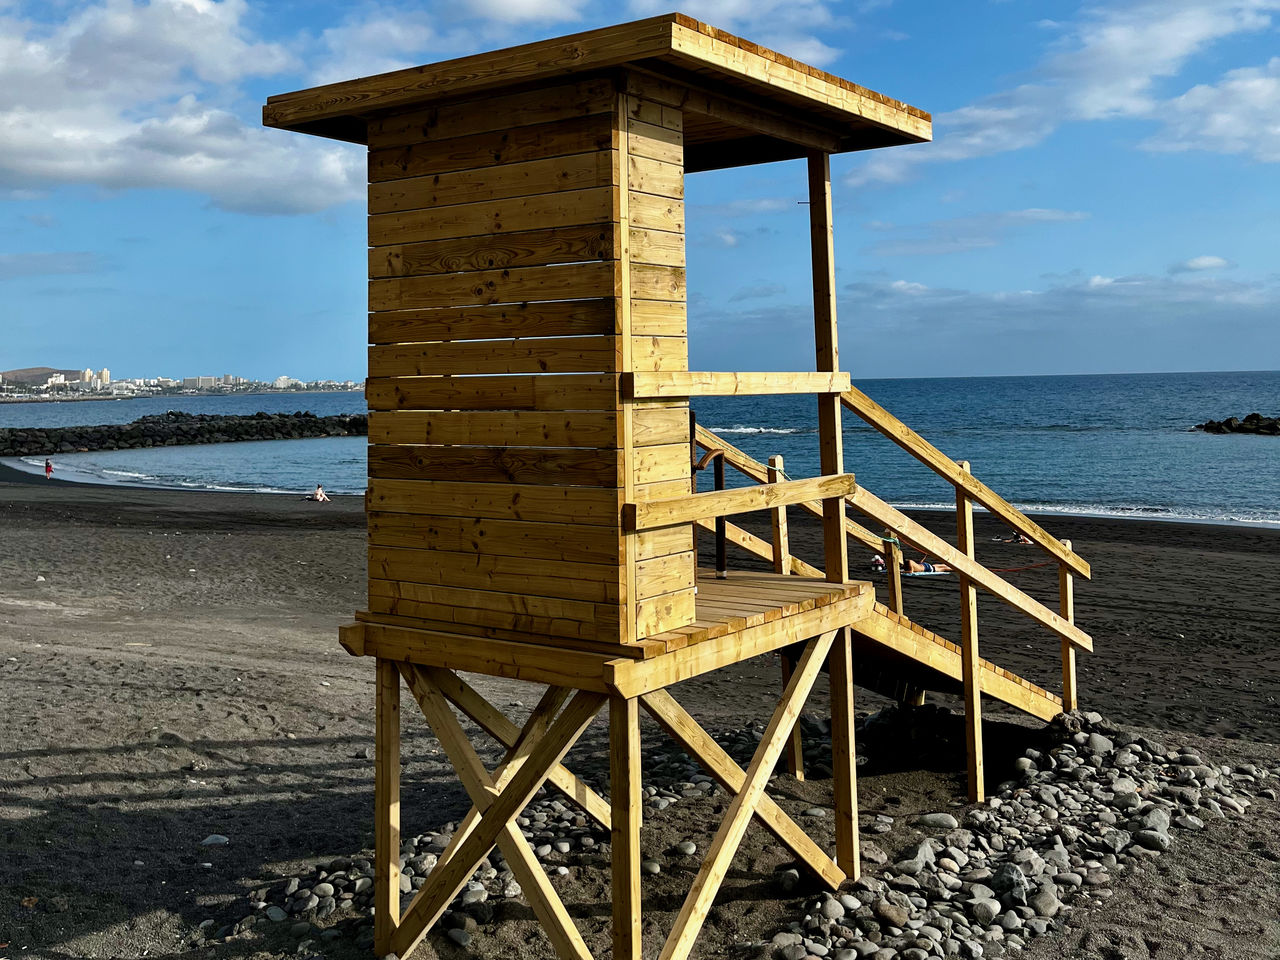 sea, water, beach, sky, land, lifeguard hut, nature, hut, cloud, architecture, man made structure, horizon over water, sand, scenics - nature, horizon, built structure, lifeguard, protection, security, wood, coast, beauty in nature, tranquility, tower, no people, day, tranquil scene, ocean, travel destinations, coastline, outdoors, observation point, shore, holiday, vacation, trip, lookout tower, non-urban scene, summer, building exterior, travel, idyllic, environment